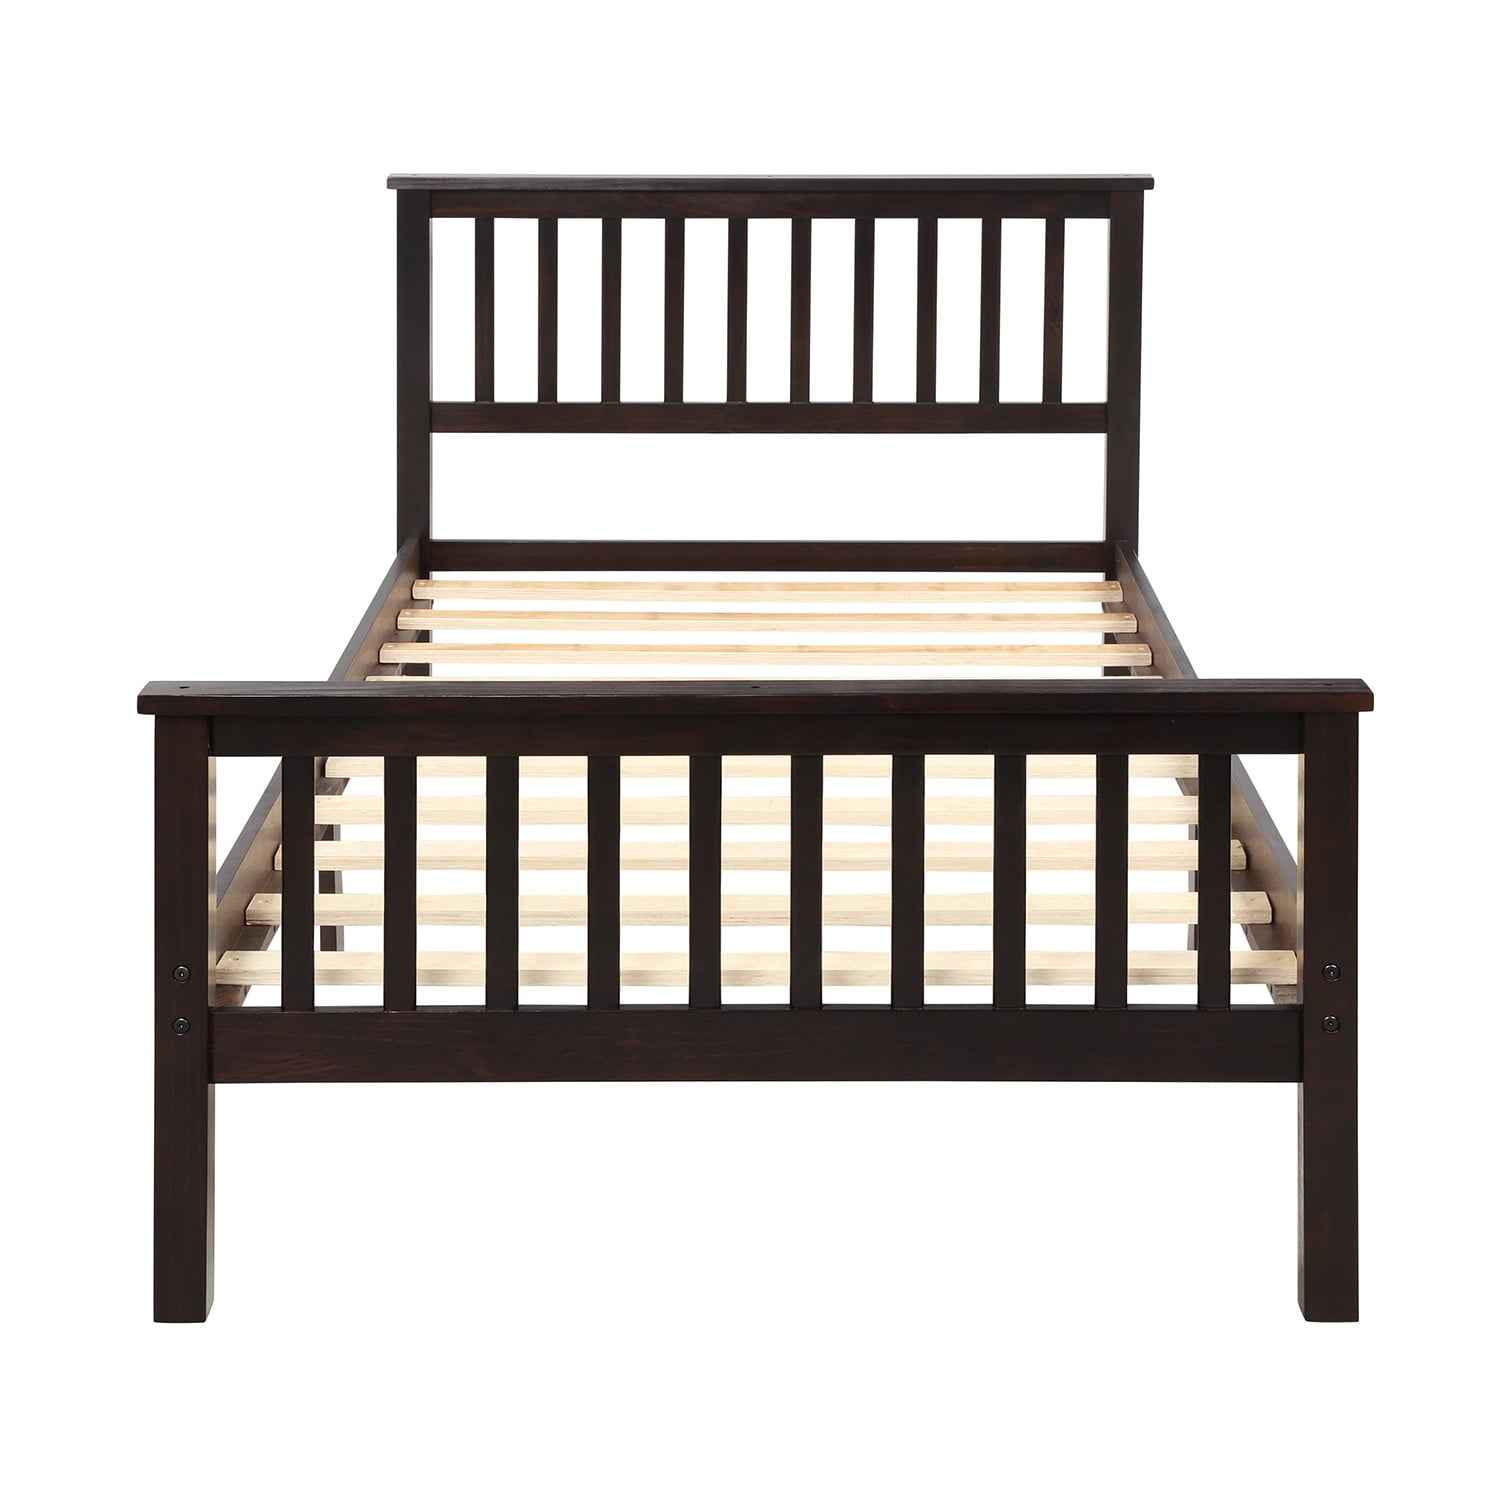 uhomepro Twin Bed Frame No Box Spring Needed, Wood Platform Bed Frame with Headboard and Footboard, Strong Wooden Slats, Twin Bed Frames for Kids, Adults, Modern Bedroom Furniture, Espresso